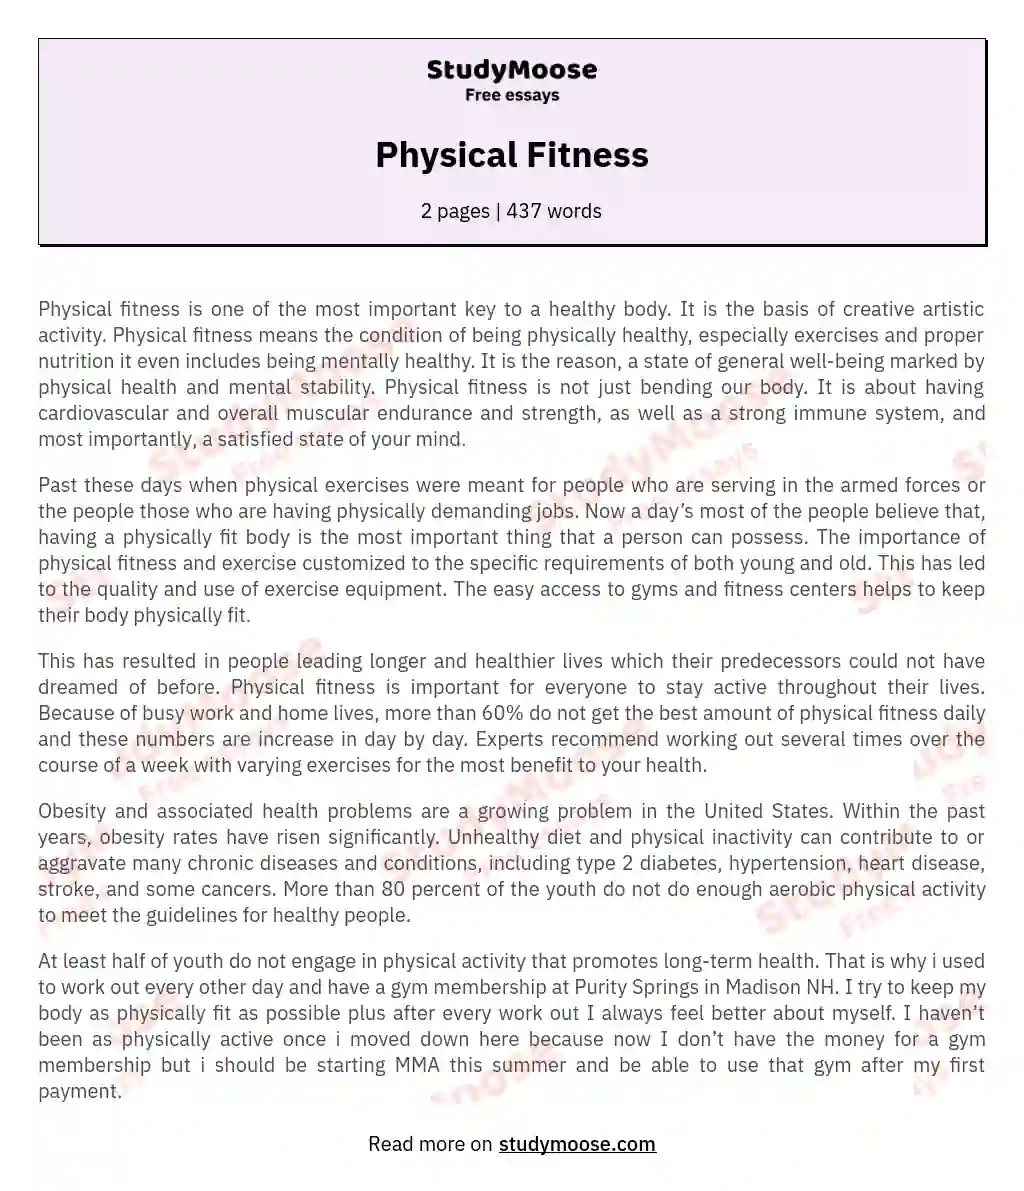 Physical Fitness essay